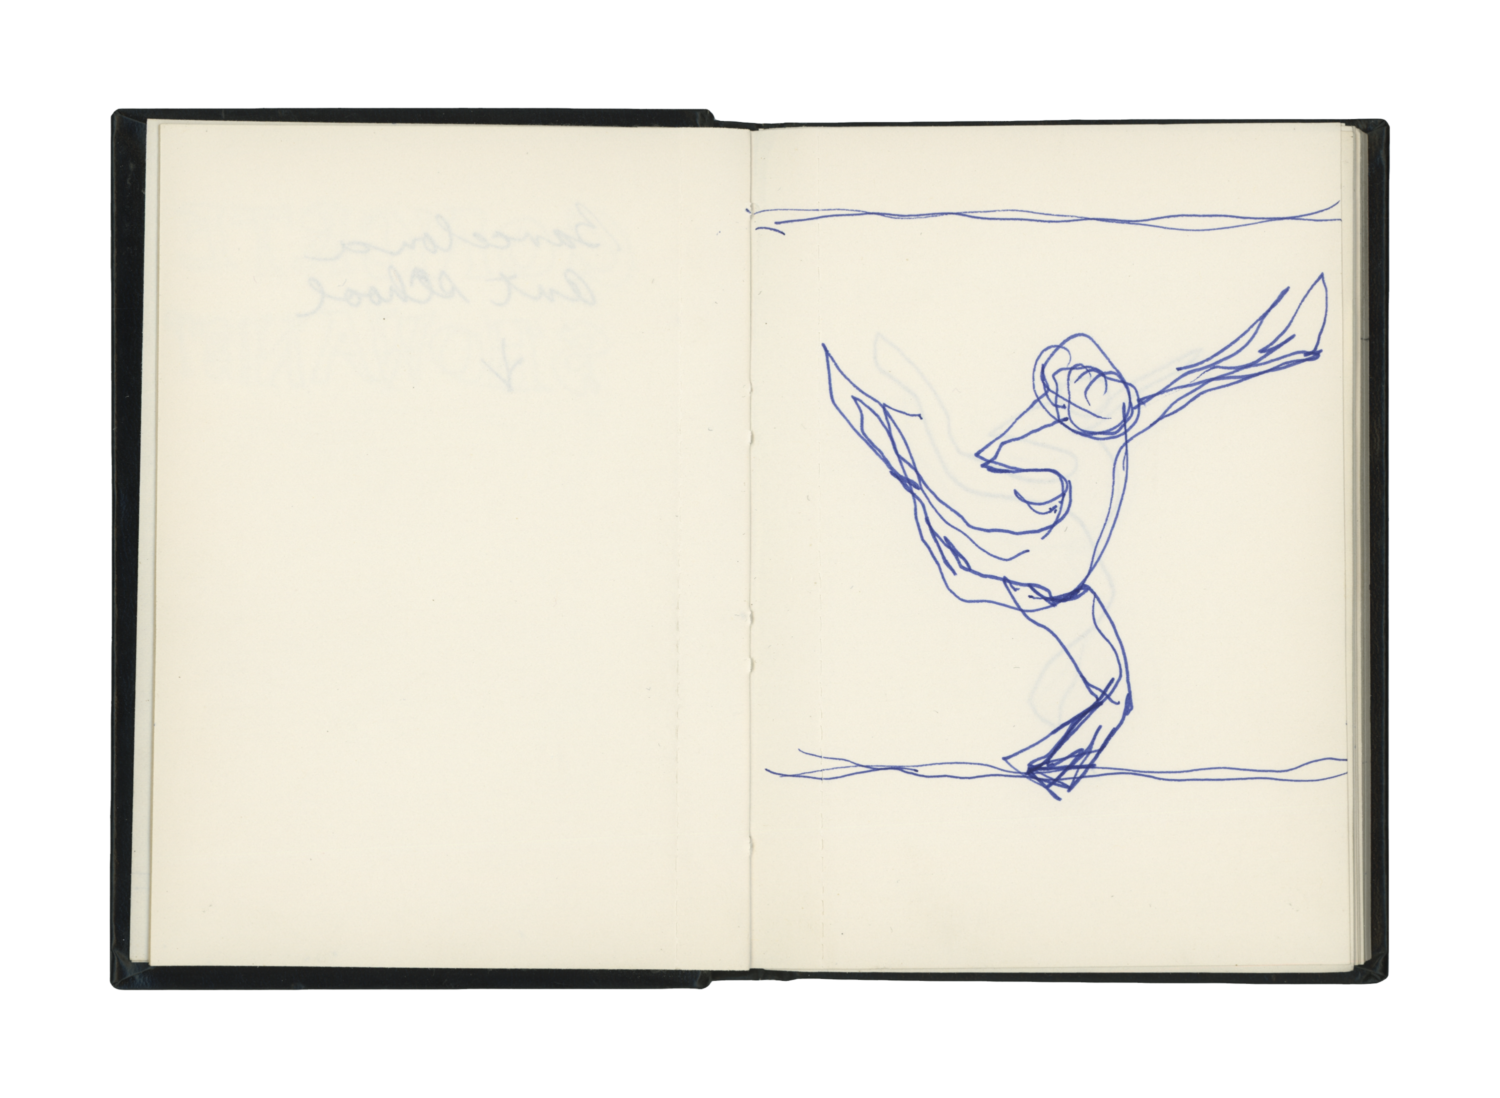 Sketch and notebook (c. 1990)